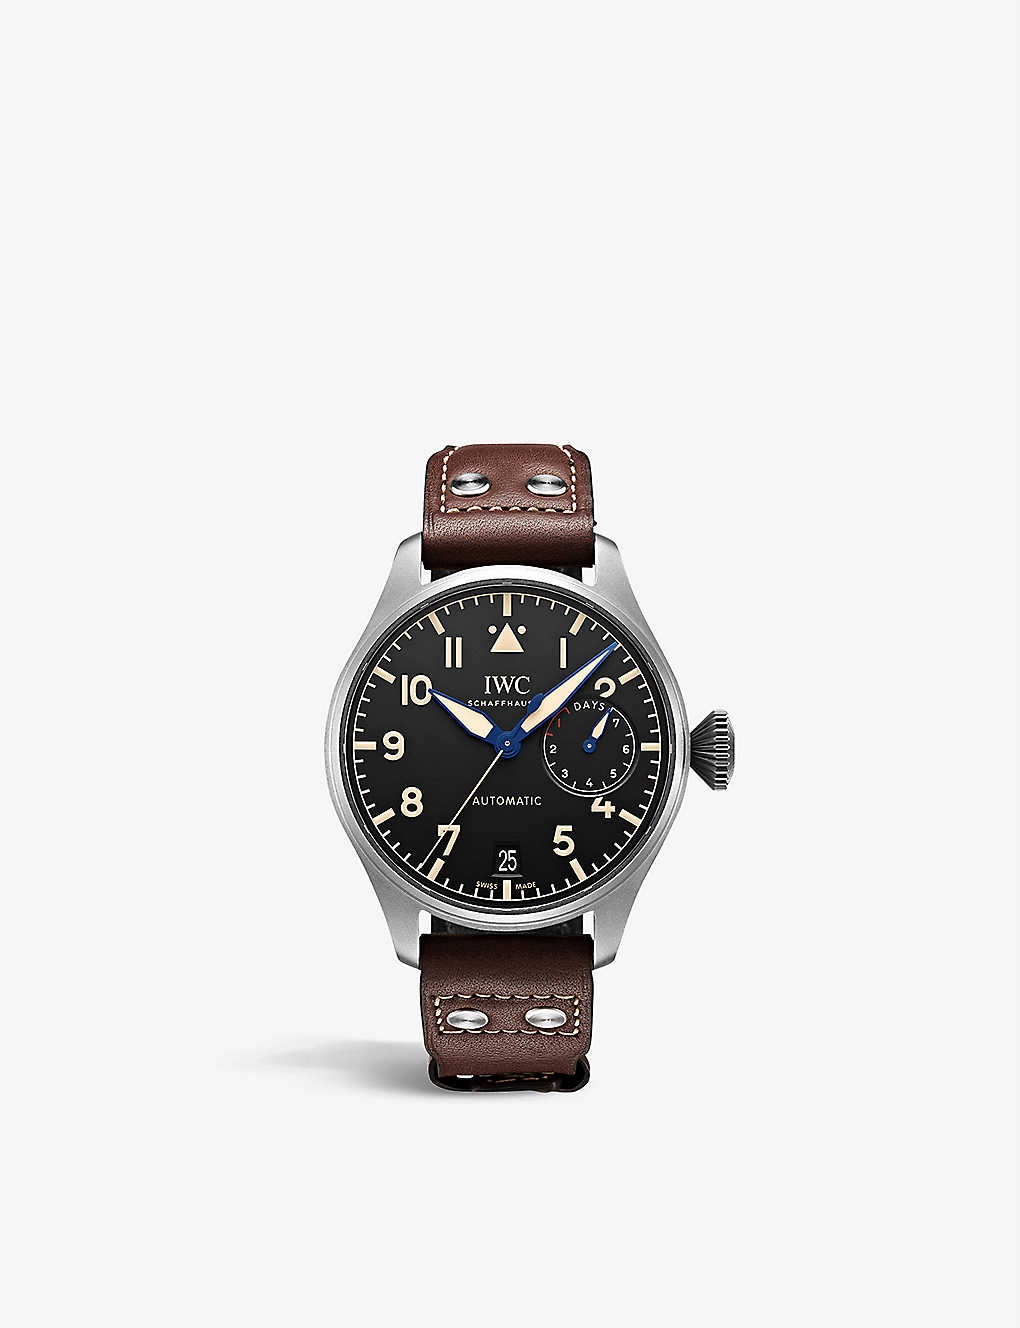 IW501004 Big Pilot's titanium and leather automatic watch - 1